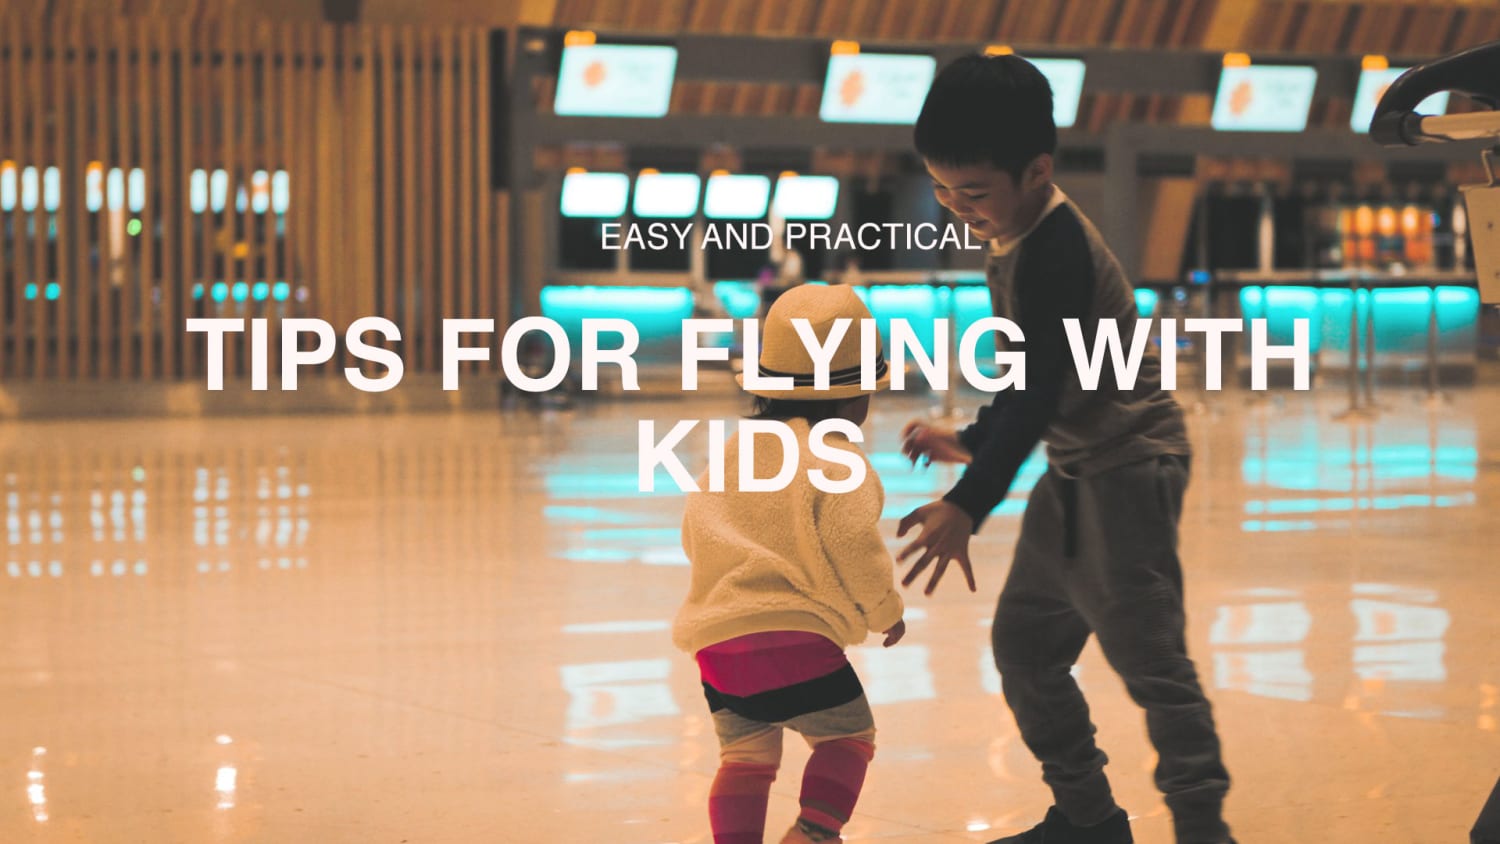 4 Easy And Practical Tips For Flying With Kids